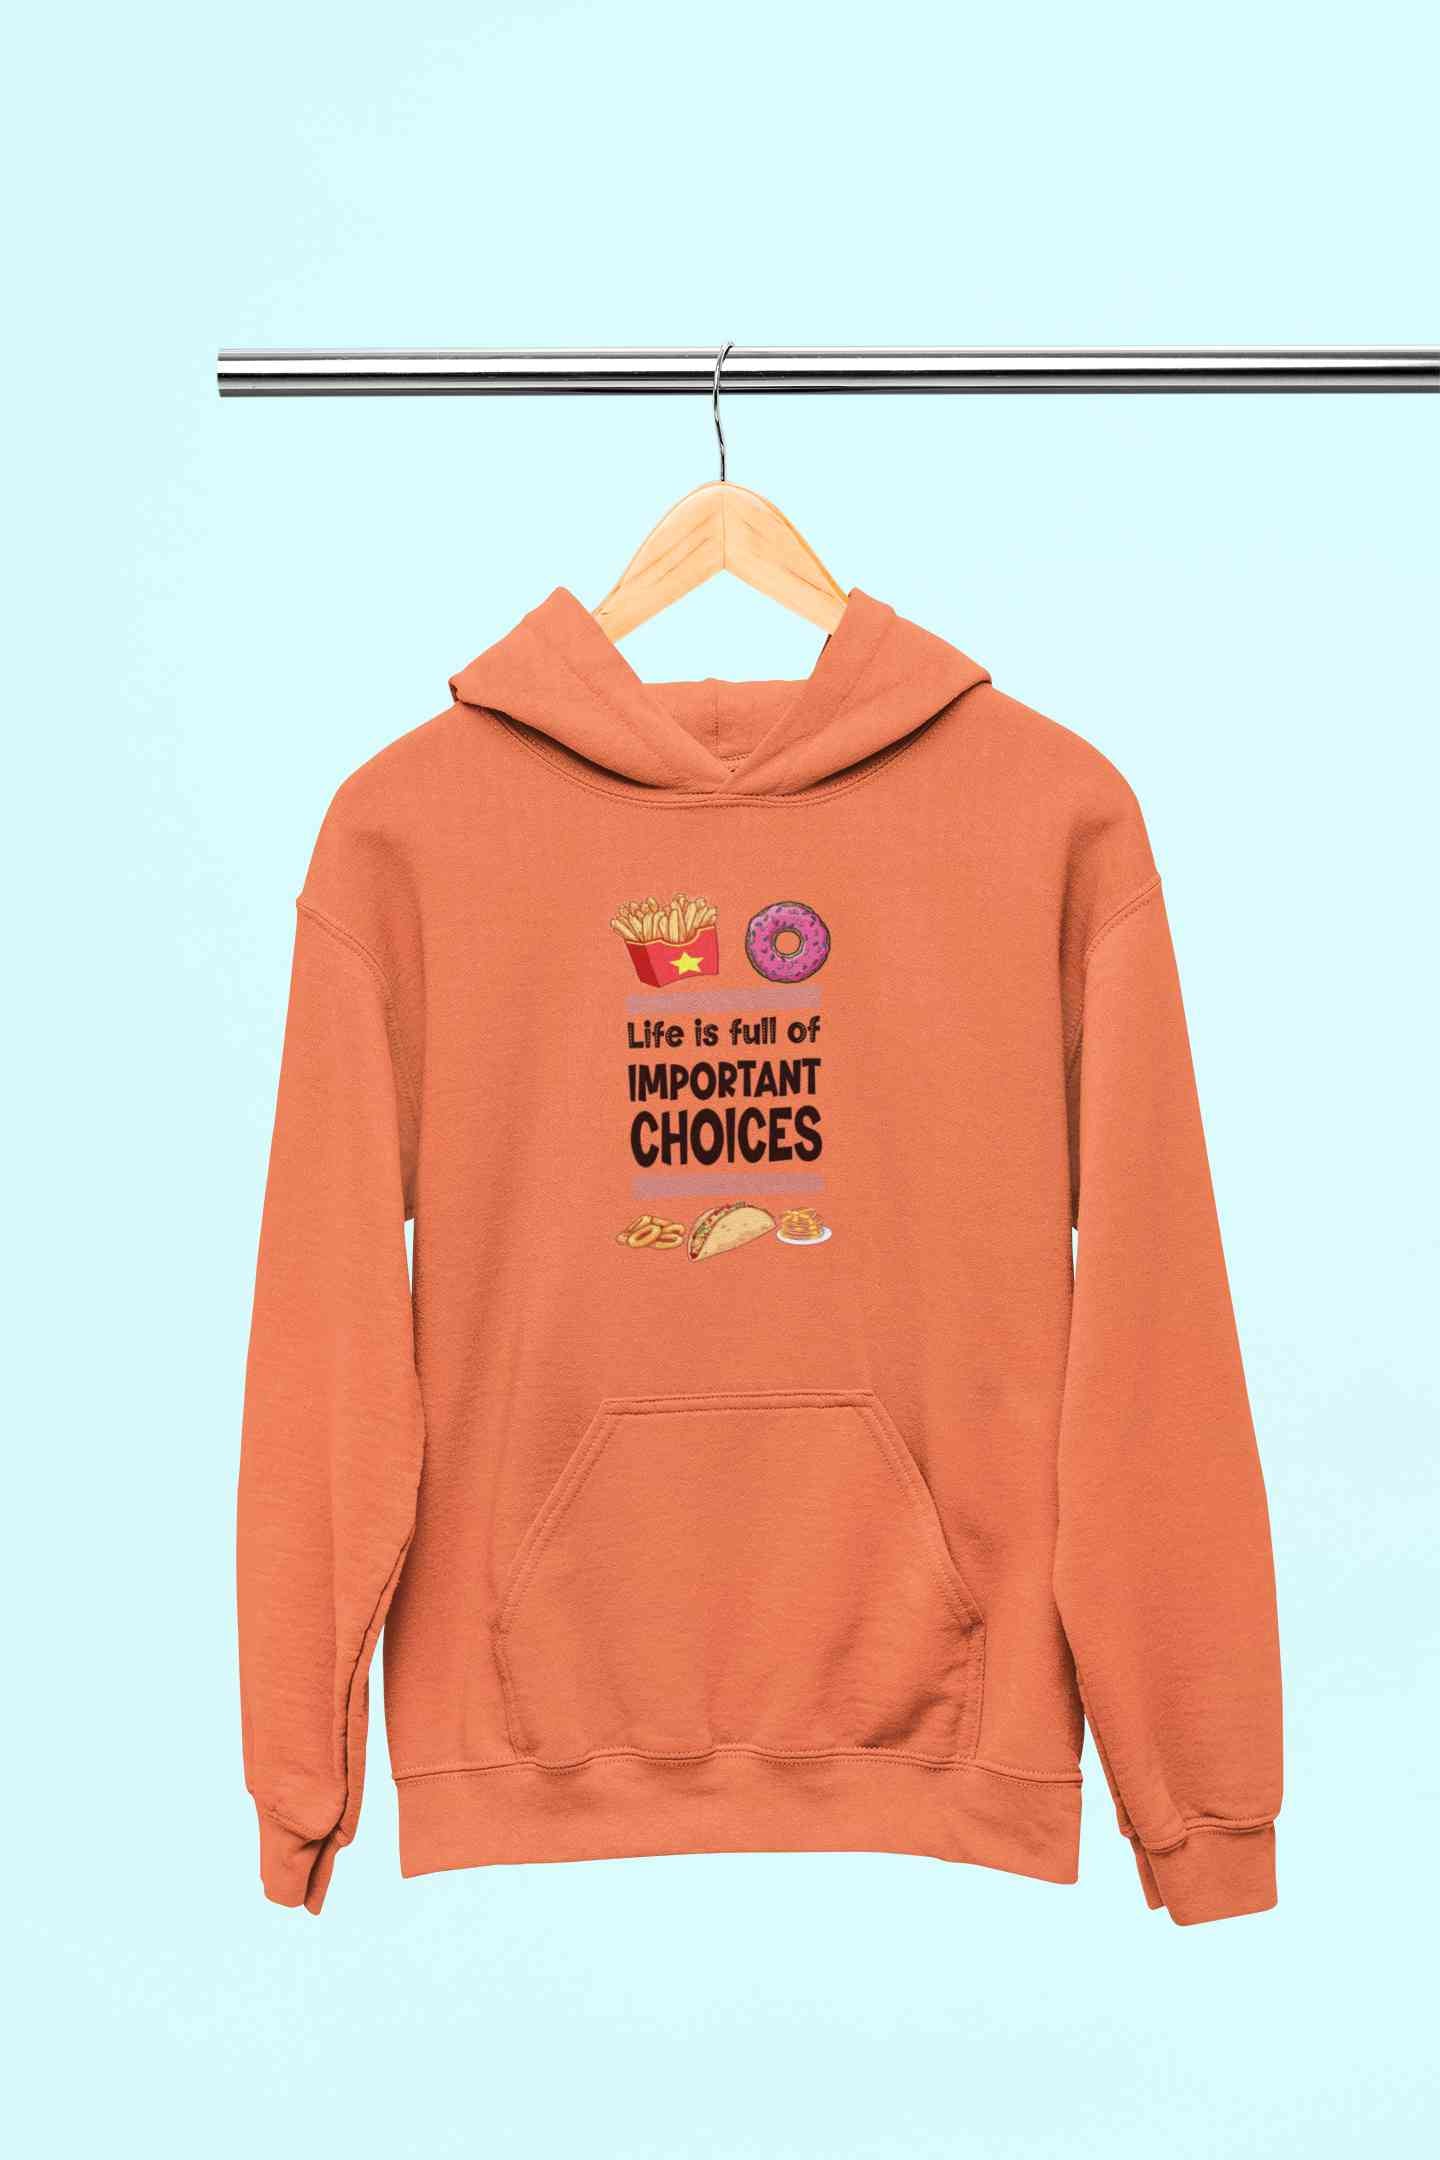 Sweet Choices Quotes Hoodies for Women-FunkyTeesClub